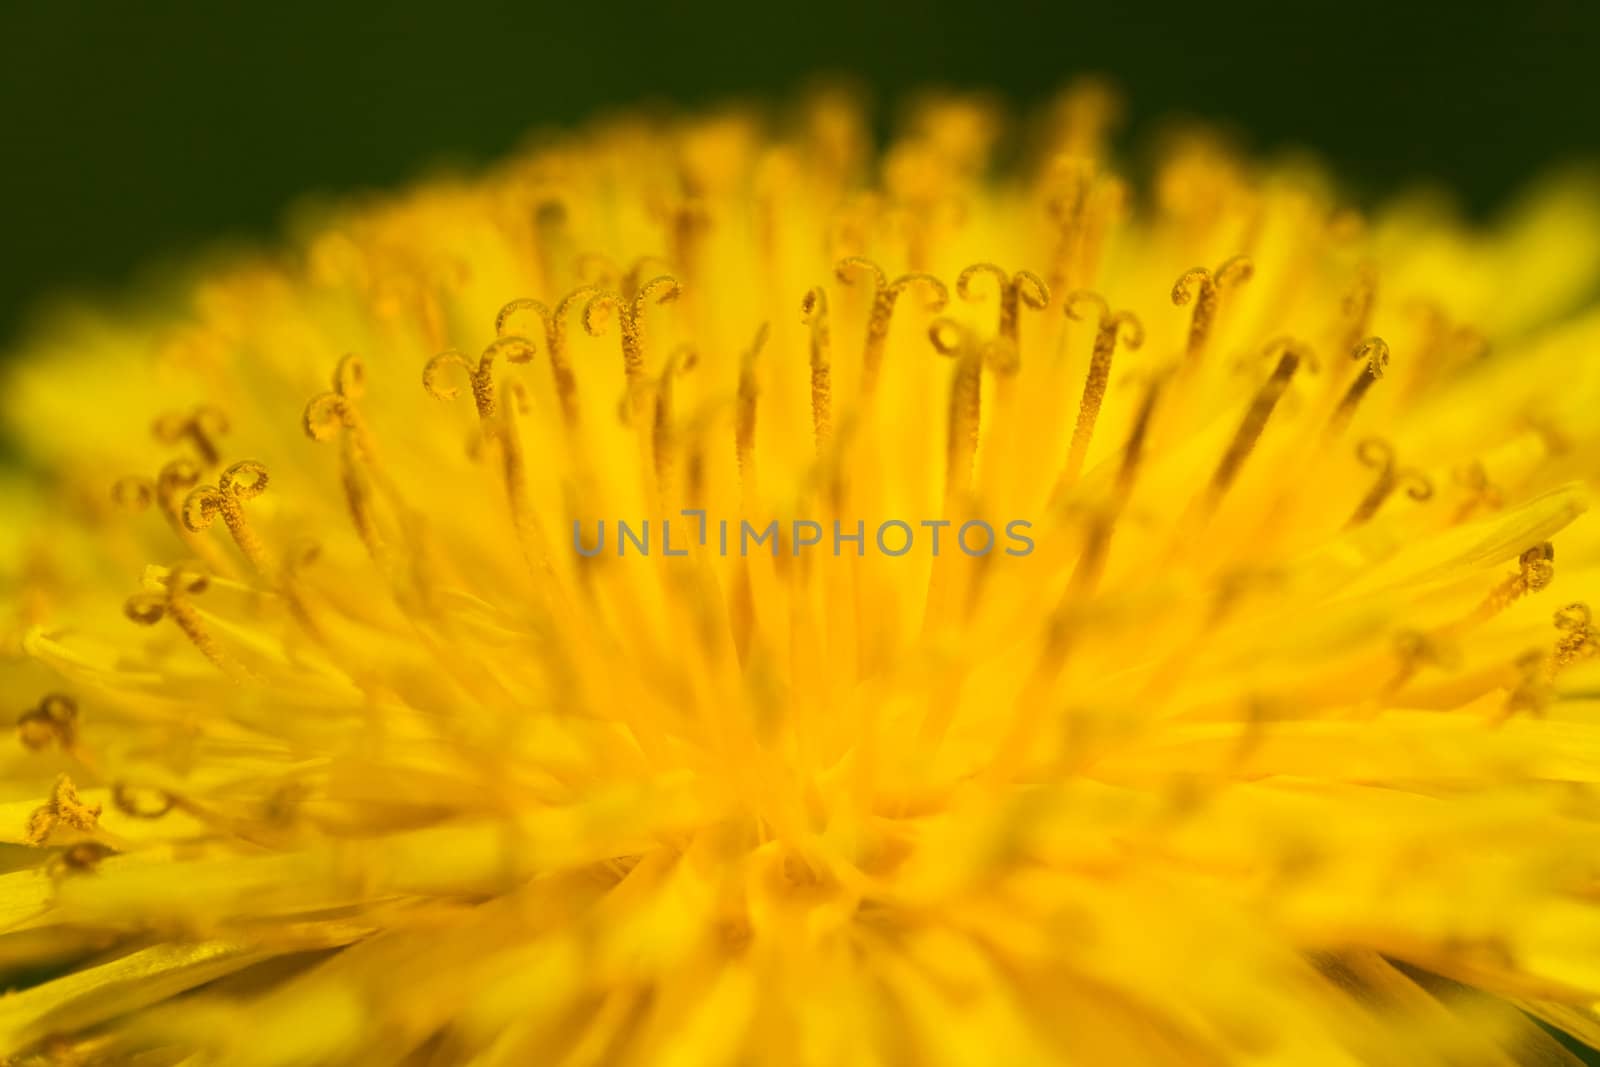 A close-up of a yellow dandelion